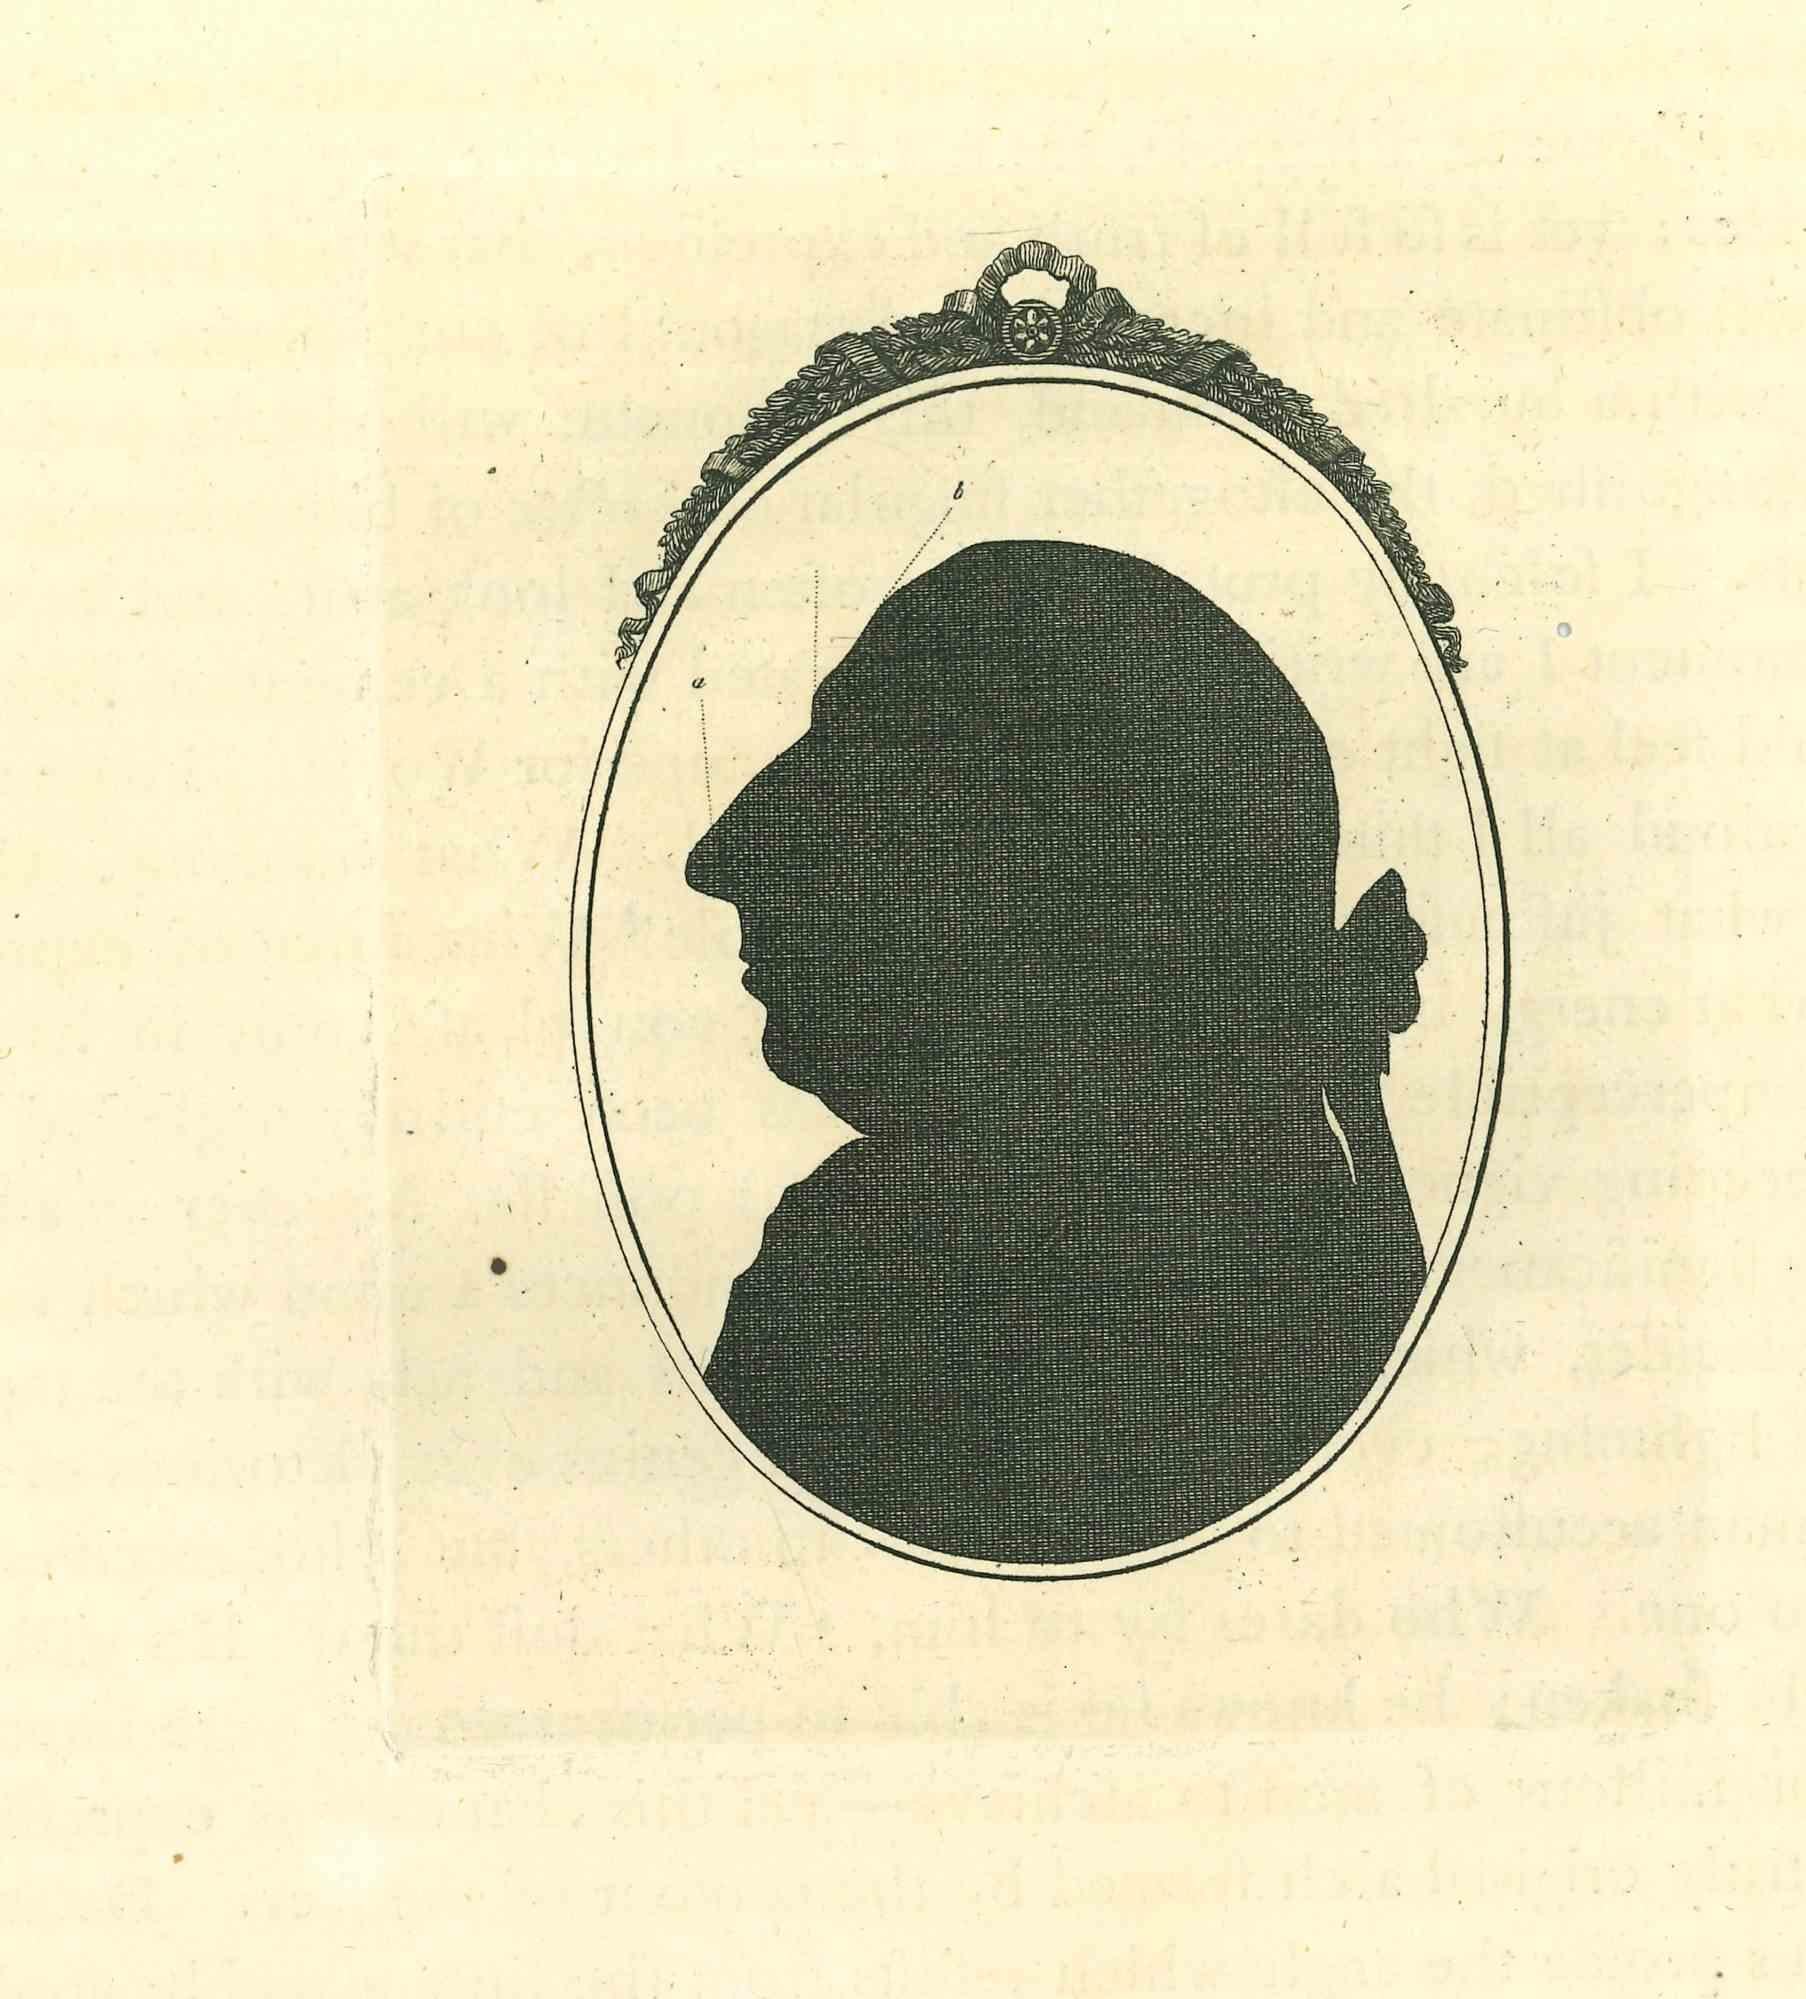 Silhouette is an original etching artwork realized by Thomas Holloway for Johann Caspar Lavater's "Essays on Physiognomy, Designed to Promote the Knowledge and the Love of Mankind", London, Bensley, 1810. 

Good conditions.

Johann Caspar Lavater